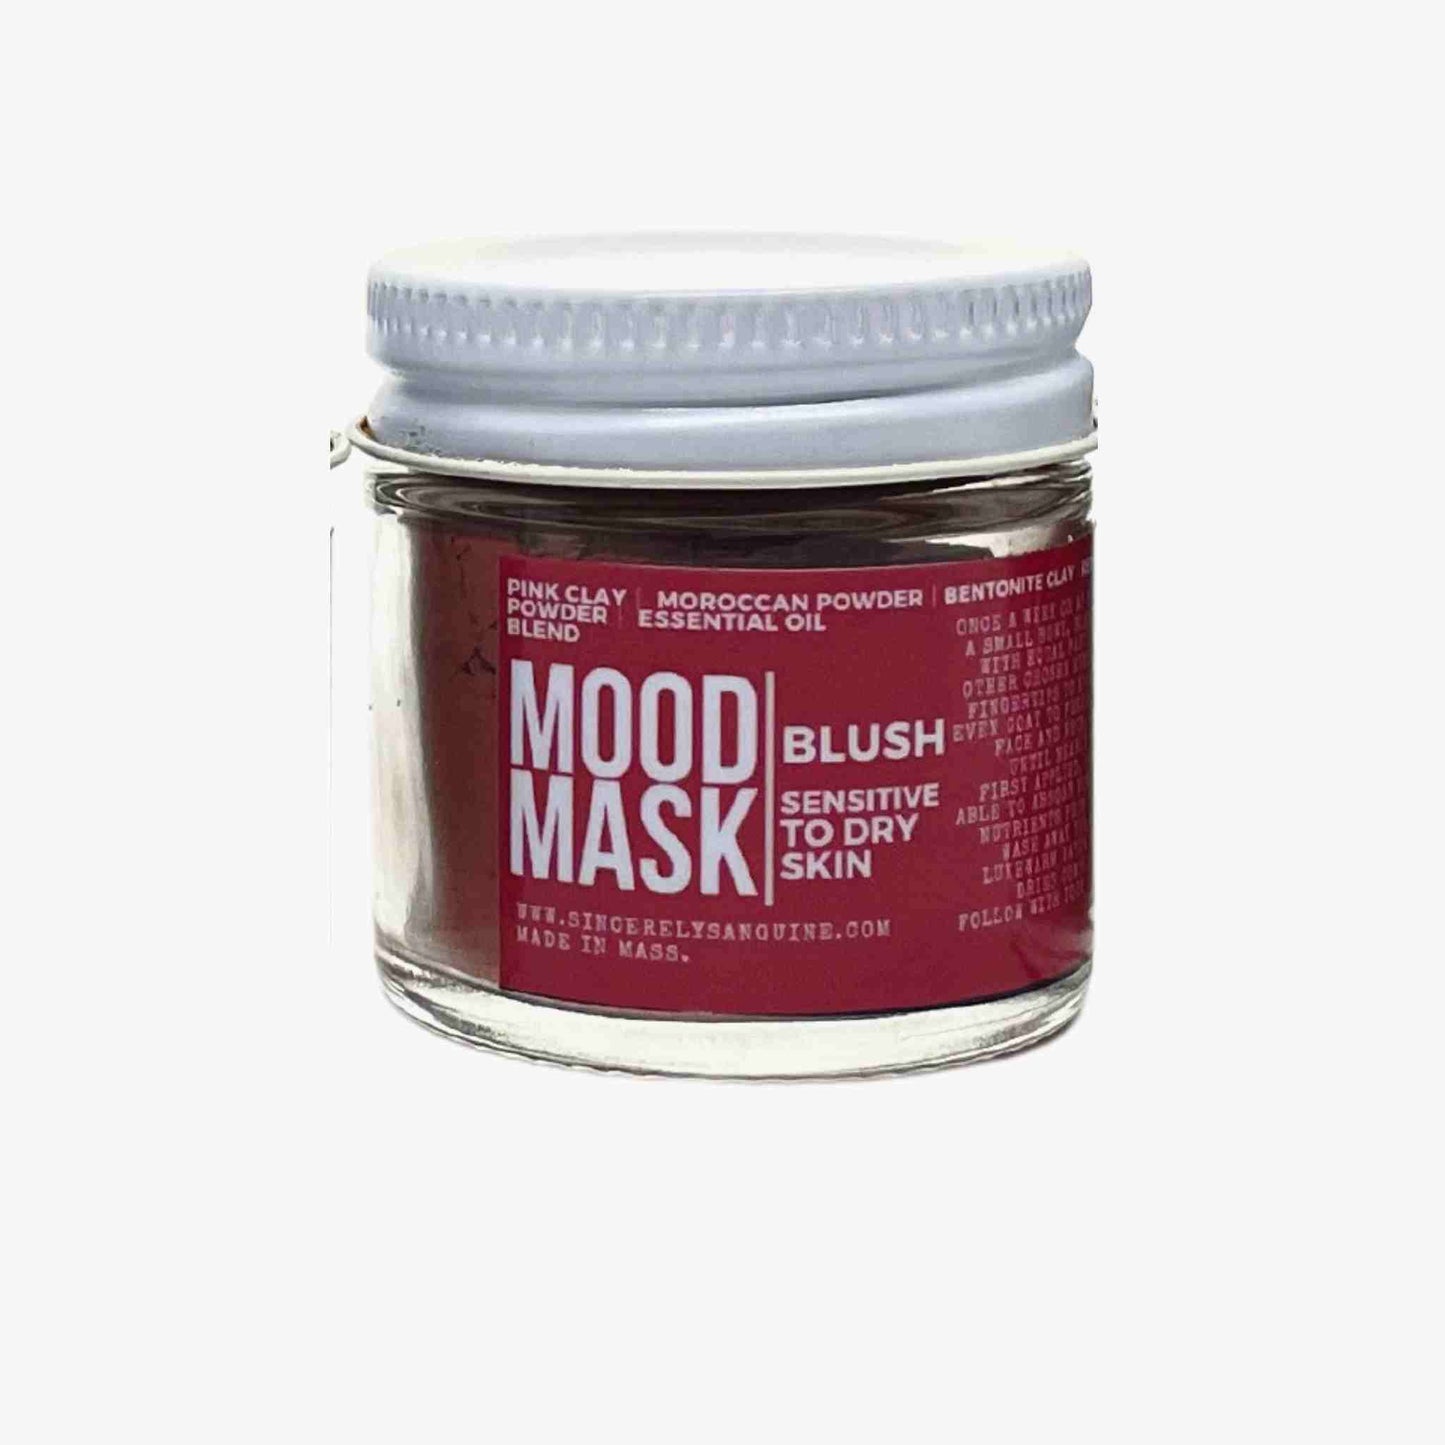 Blush Clay Mask | Unclog Pores, Refine Skin, and Embrace a Natural Blush